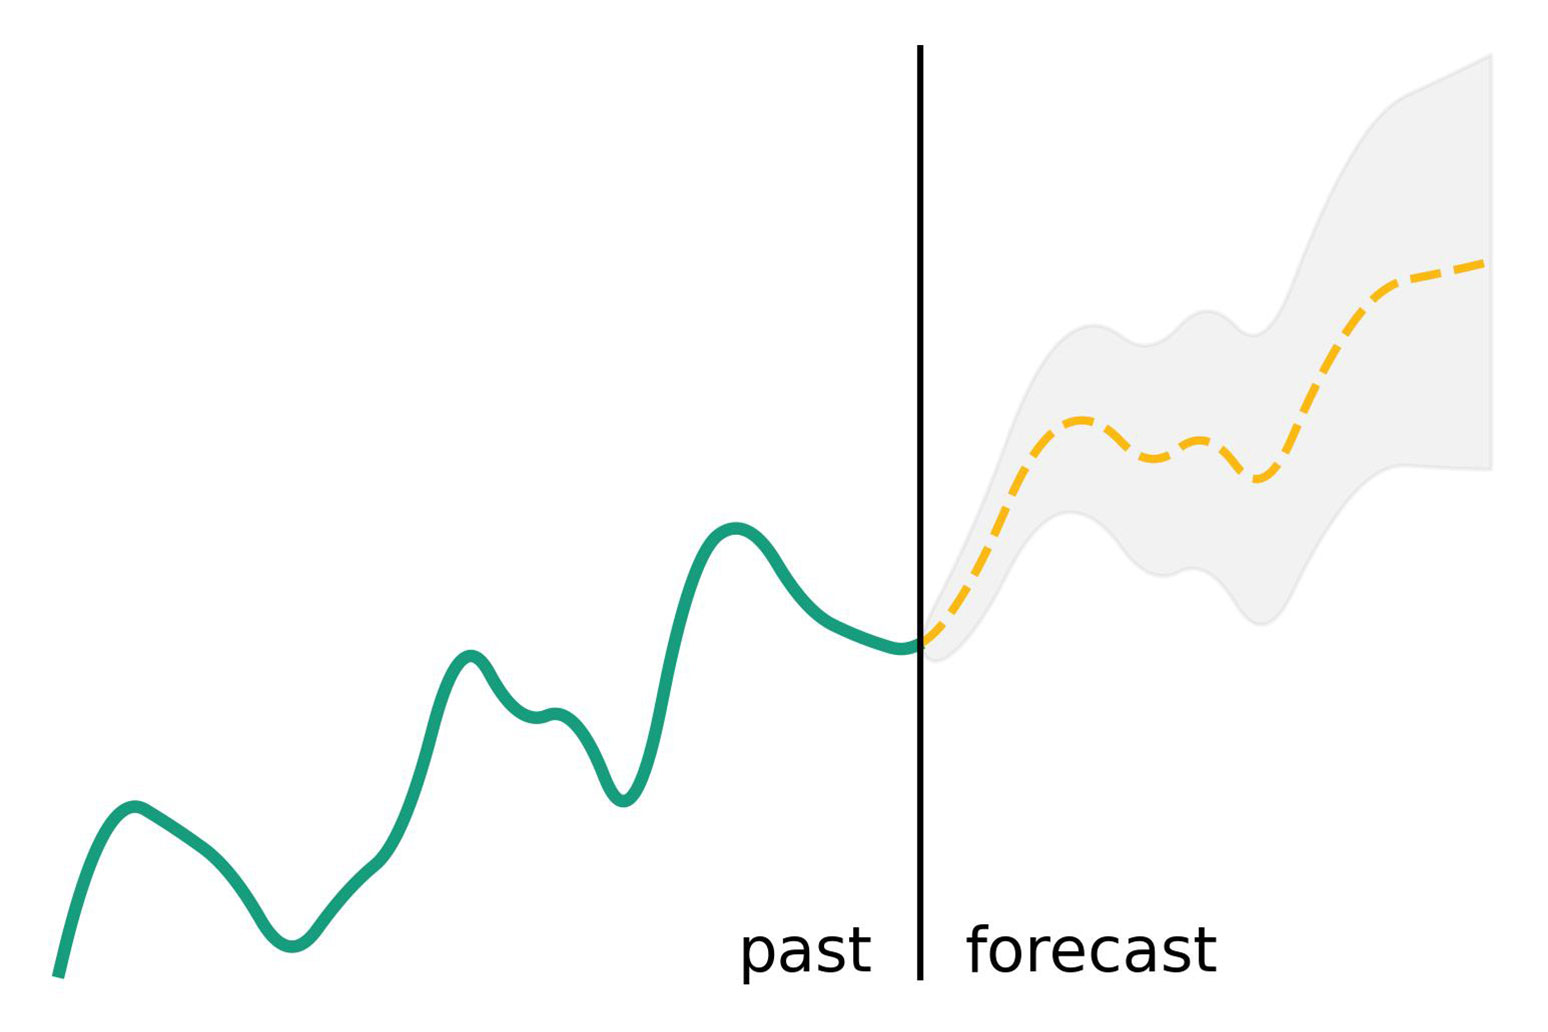 Time series forecasting